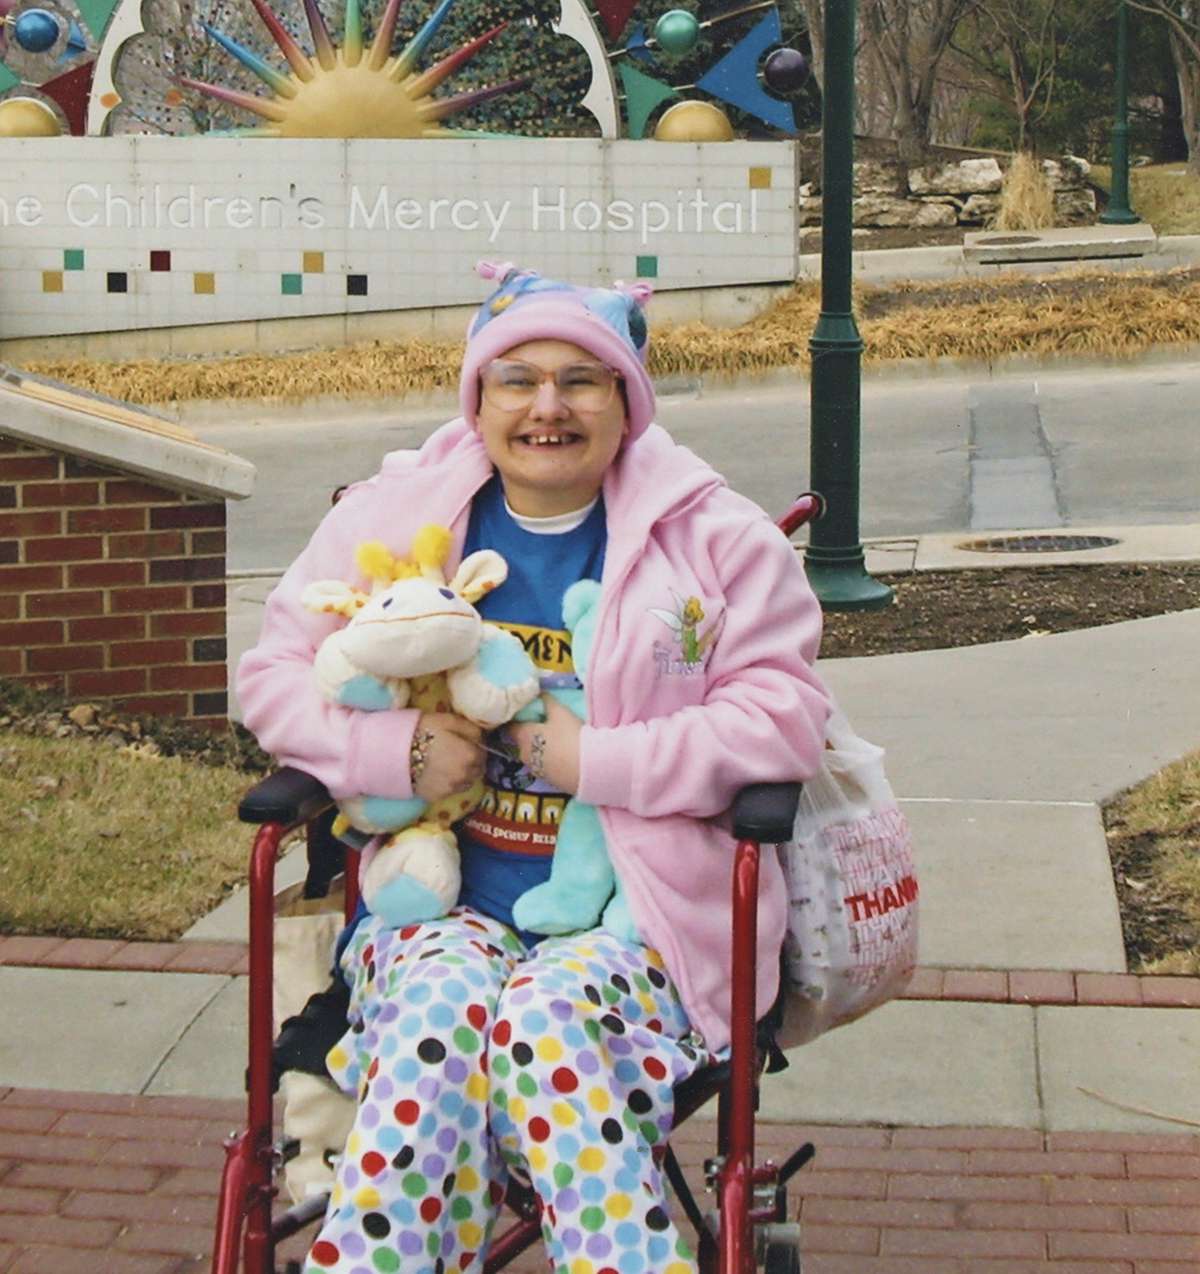 Gypsy Rose Blanchard: the Lifetime documentary to be released on Jan. 5 2024 "The Prison Confessions of Gypsy Rose Blanchard" about her life in prison, her engagement to one man and marriage to another.